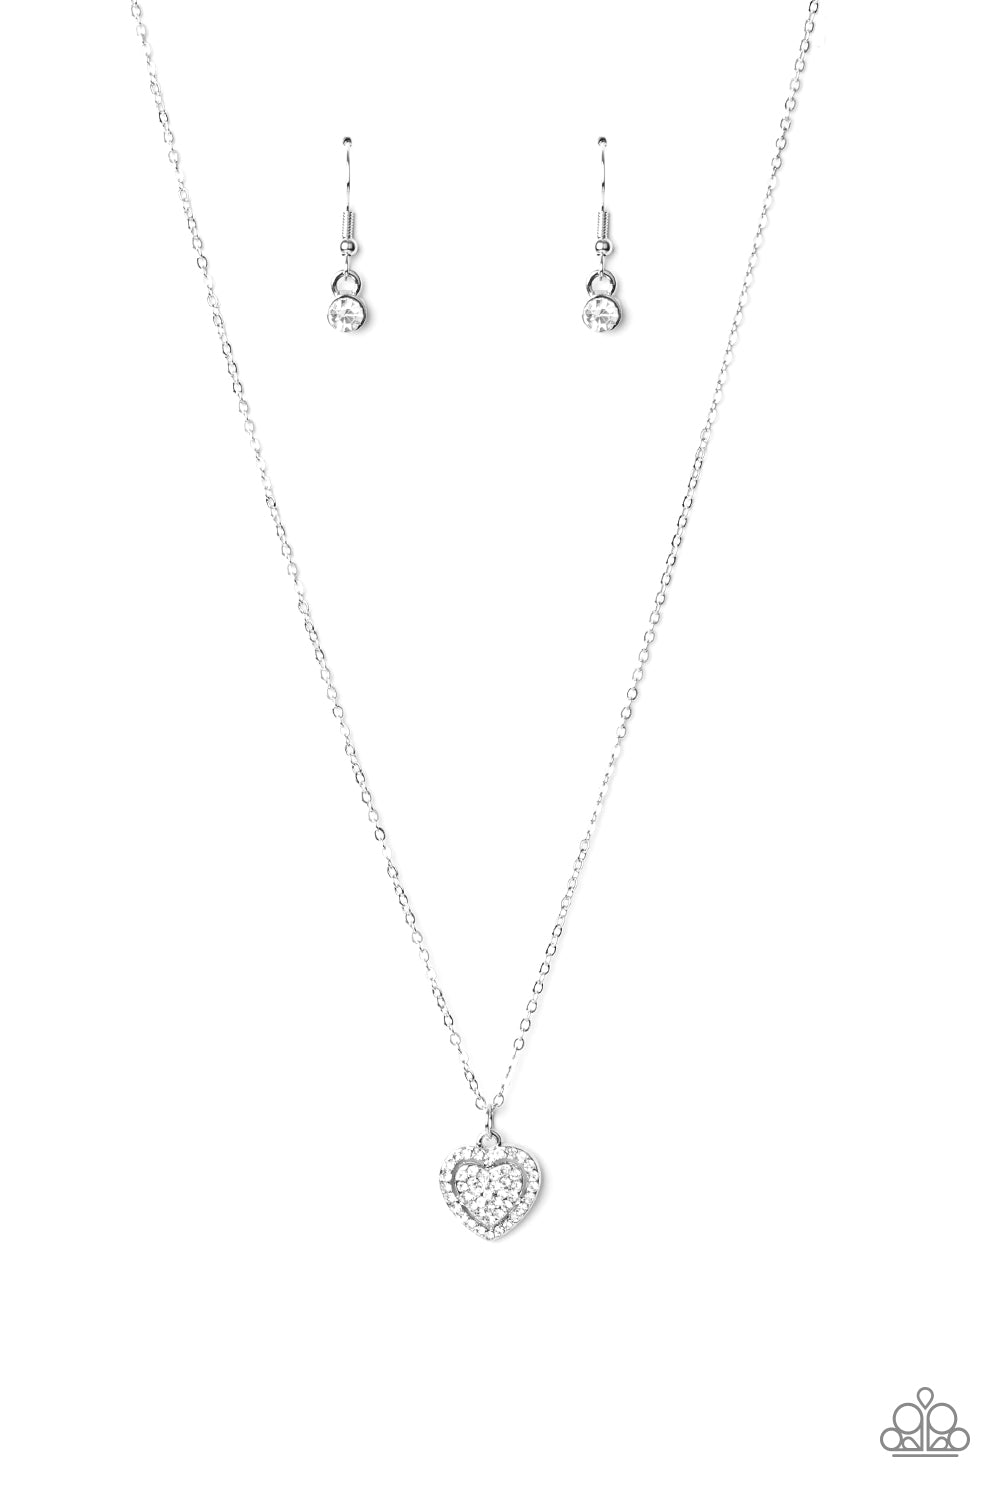 My Heart Goes Out to You - white -Paparazzi necklace